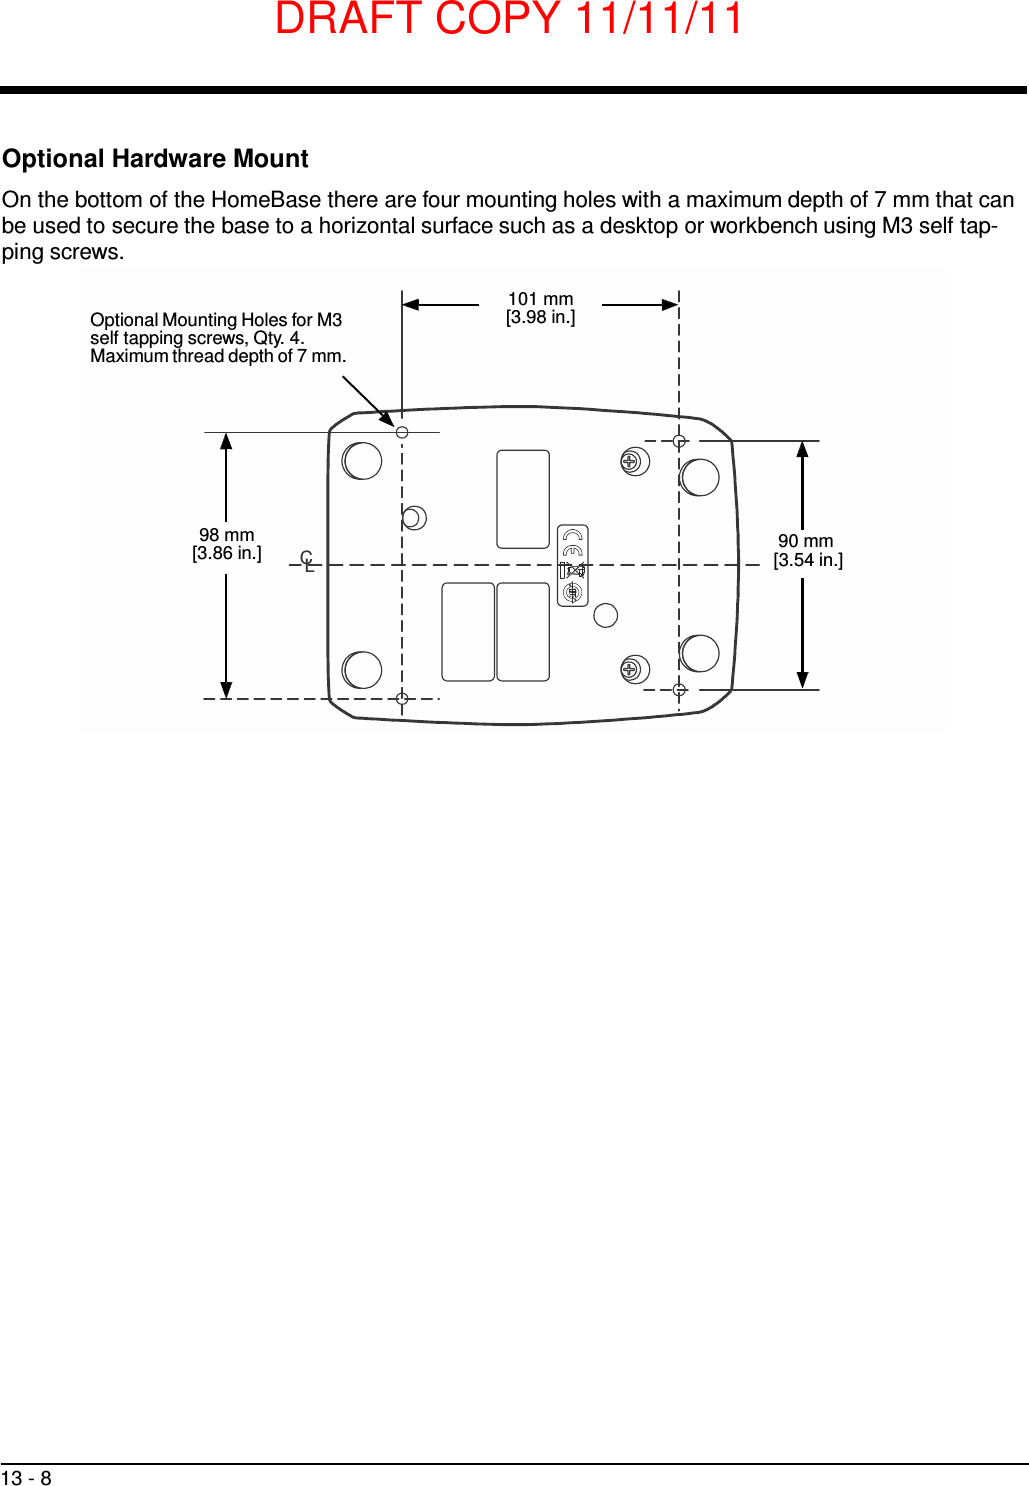 DRAFT COPY 11/11/11 13 - 8     Optional Hardware Mount  On the bottom of the HomeBase there are four mounting holes with a maximum depth of 7 mm that can be used to secure the base to a horizontal surface such as a desktop or workbench using M3 self tap- ping screws.   Optional Mounting Holes for M3 self tapping screws, Qty. 4. Maximum thread depth of 7 mm. 101 mm [3.98 in.]         98 mm [3.86 in.]  CL 90 mm [3.54 in.] 